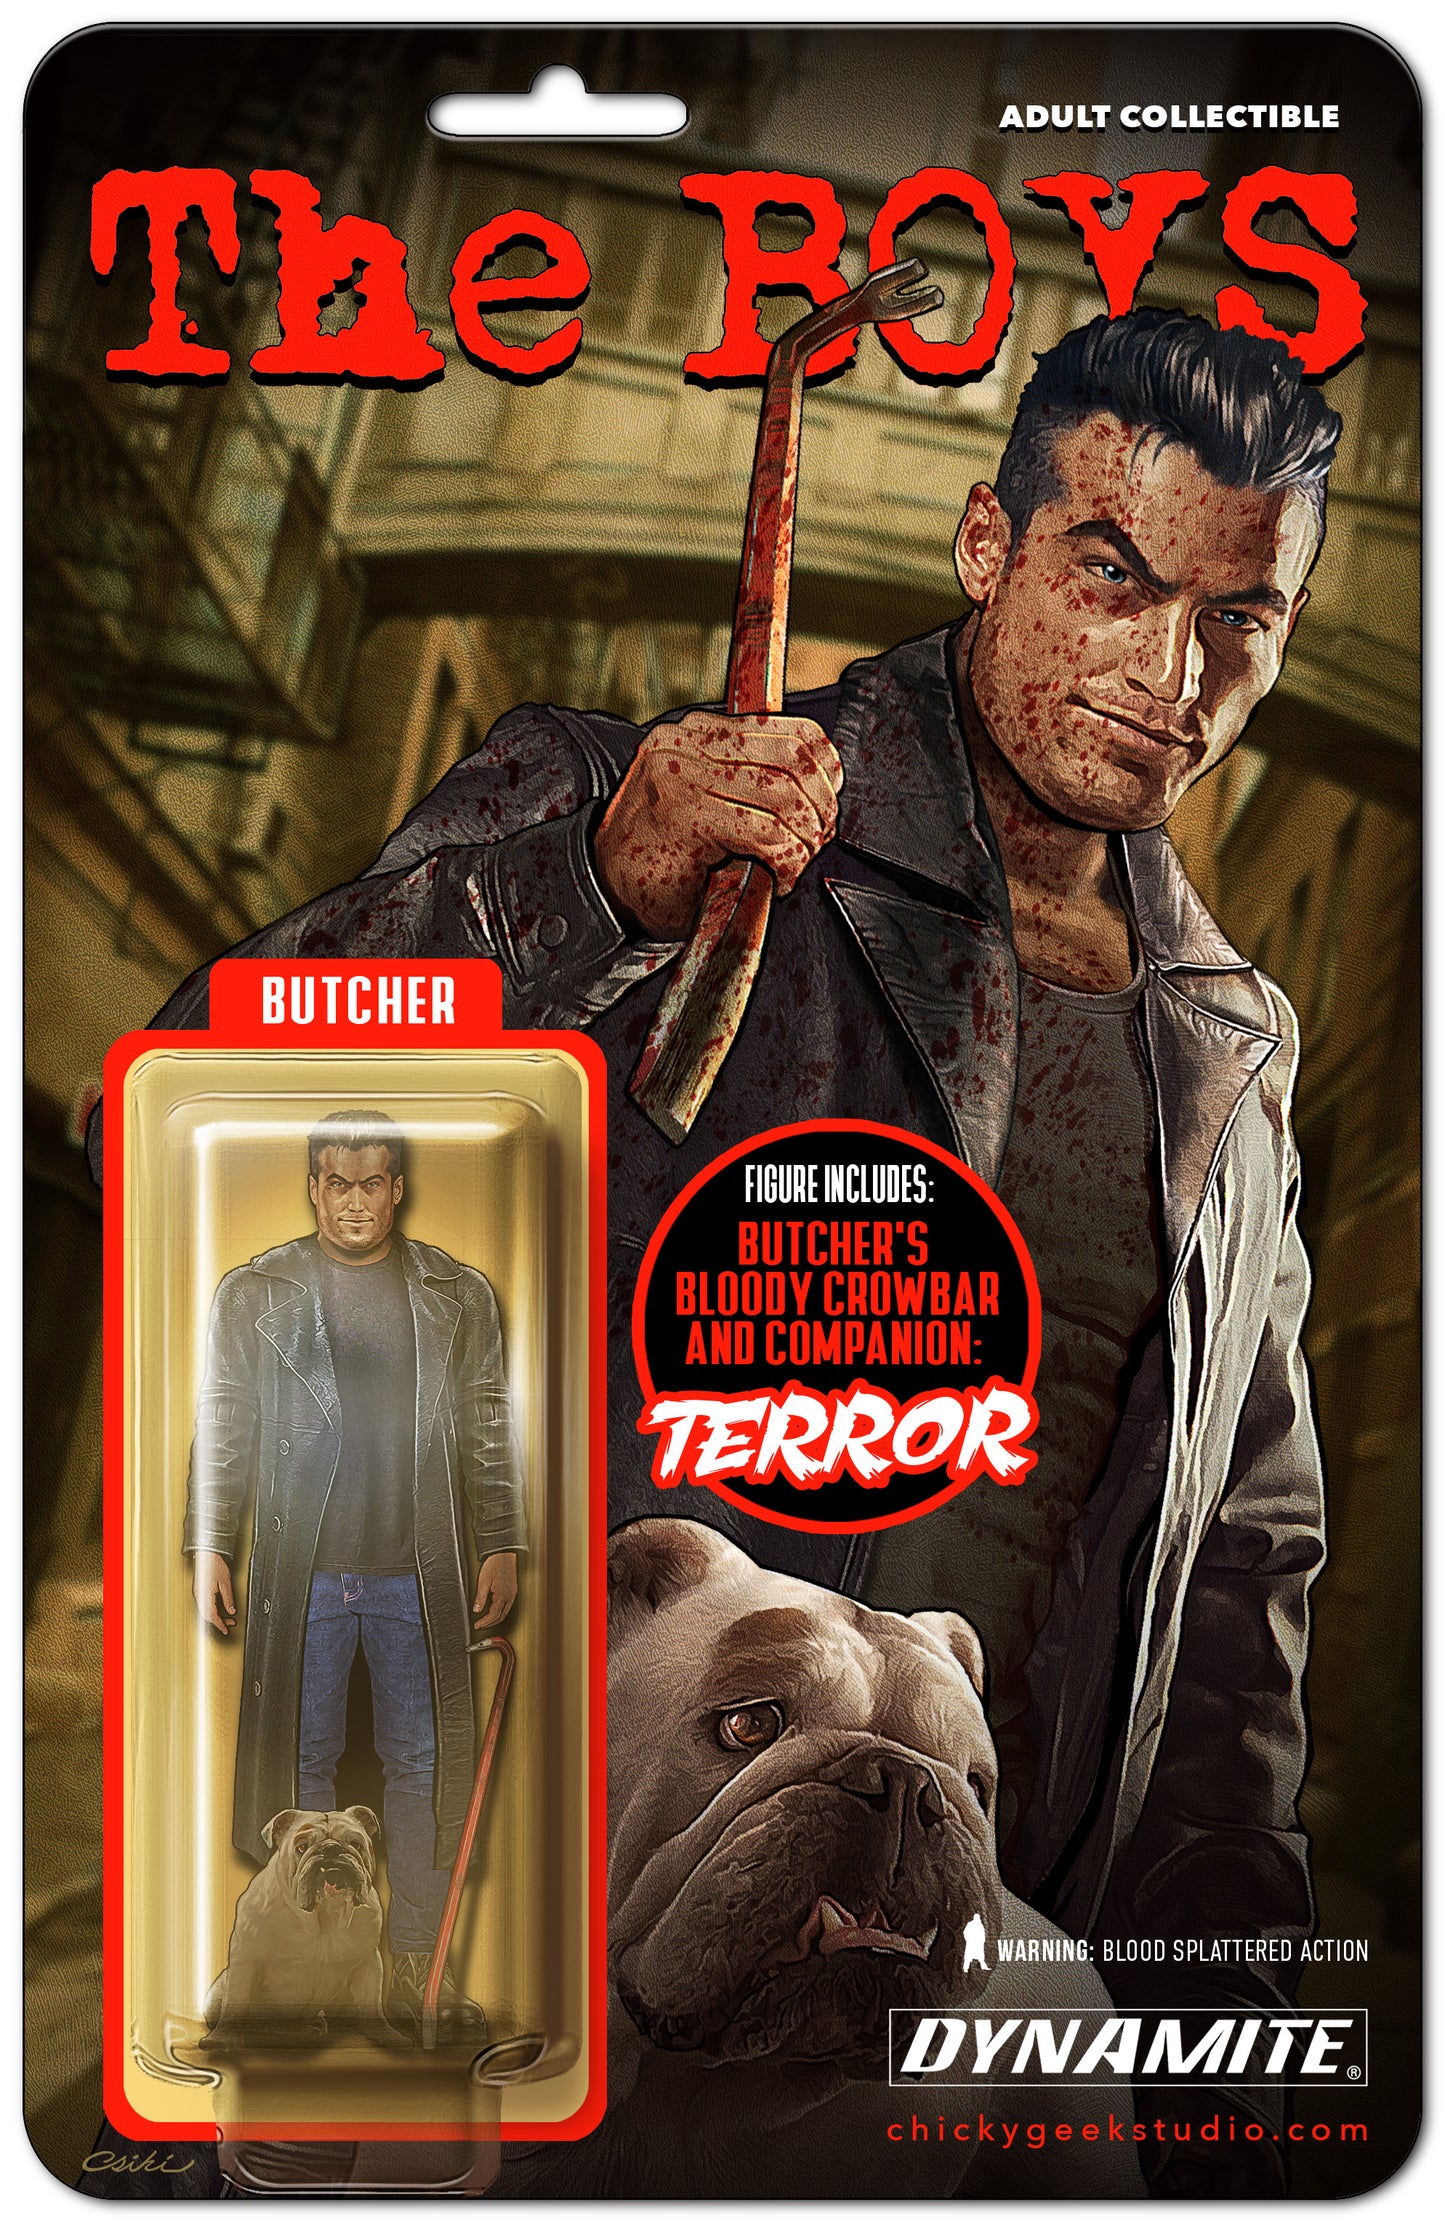 THE BOYS #1 ROB CSIKI BUTCHER & TERROR ACTION FIGURE VARIANT LIMITED TO 500 COPIES